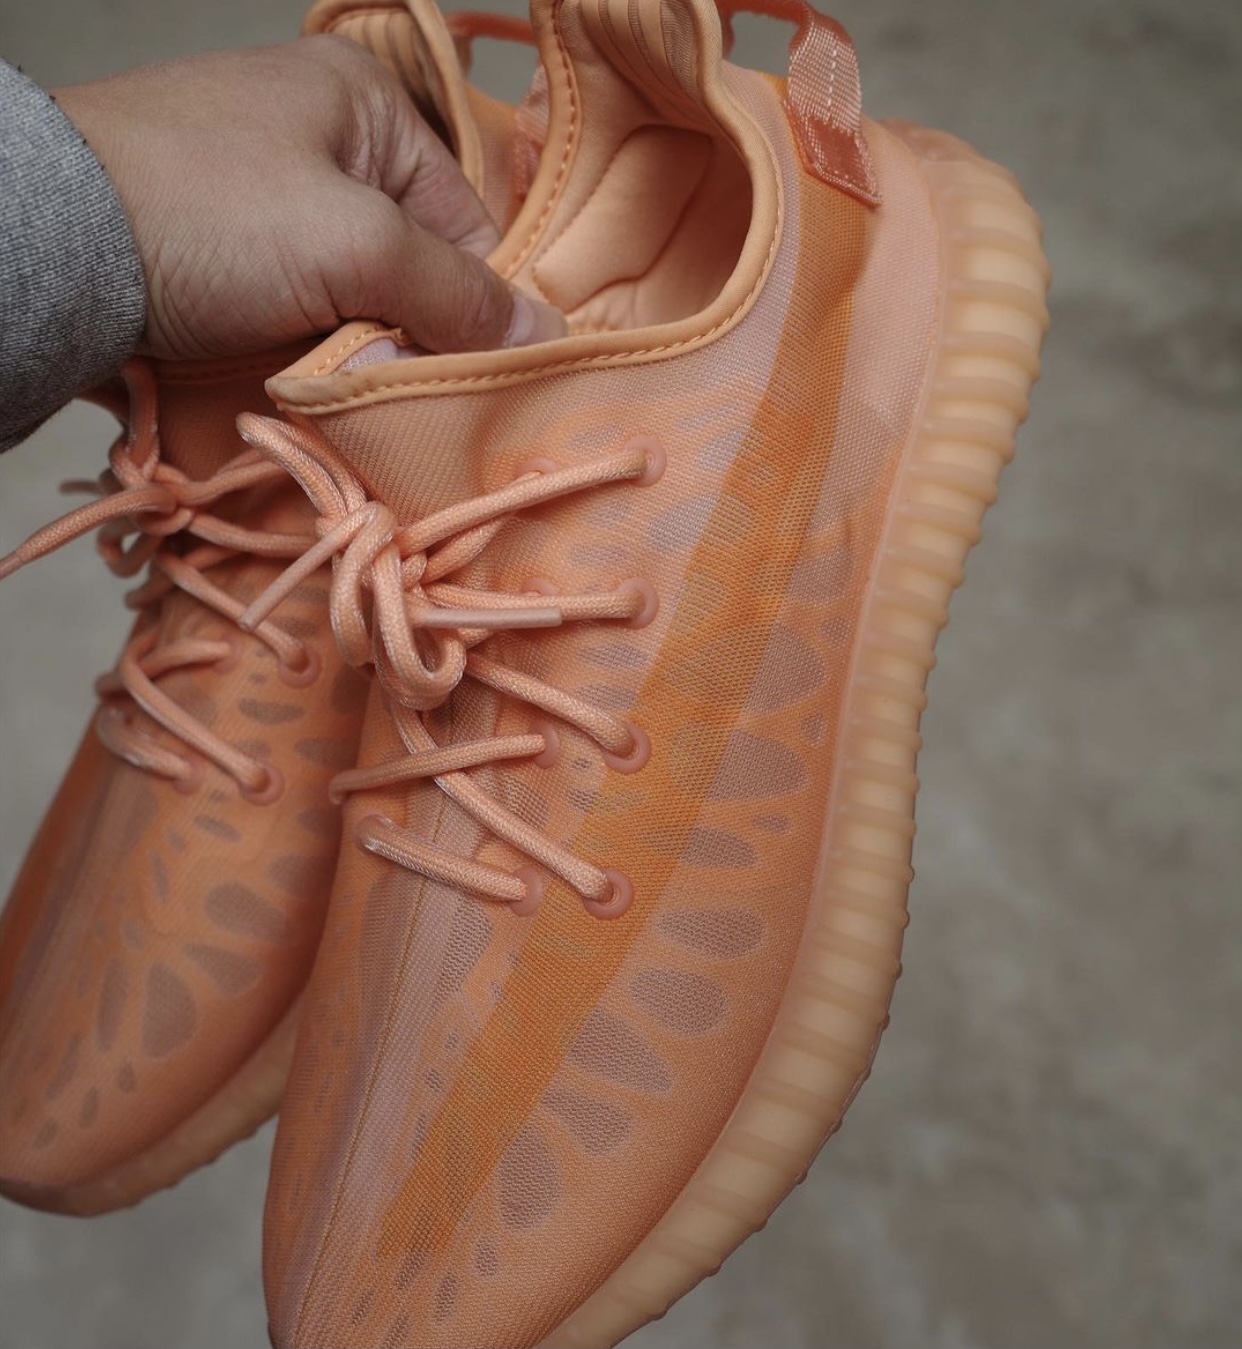 adidas yeezy boost 350 v2 mono clay release date 9